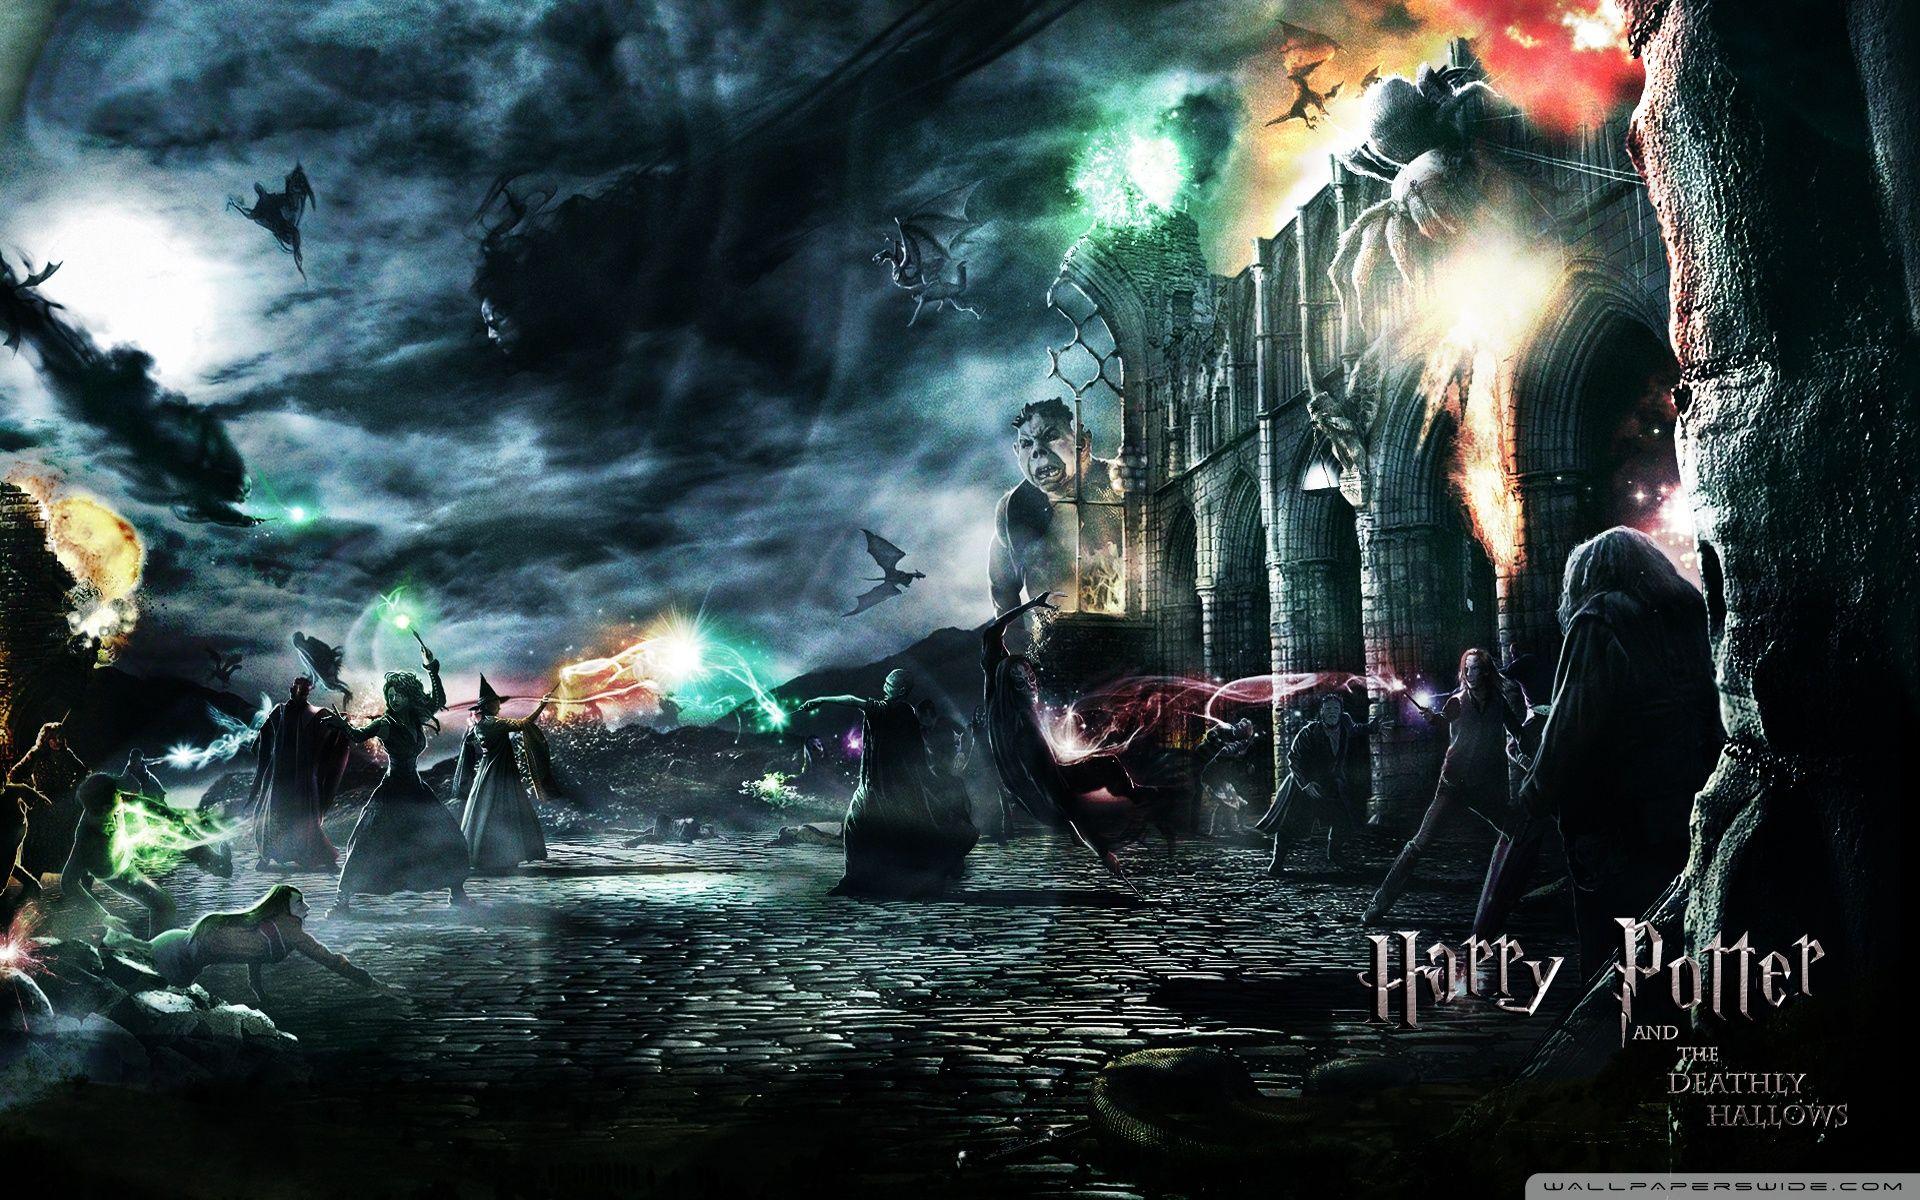 Harry Potter image hp HD wallpaper and background photo